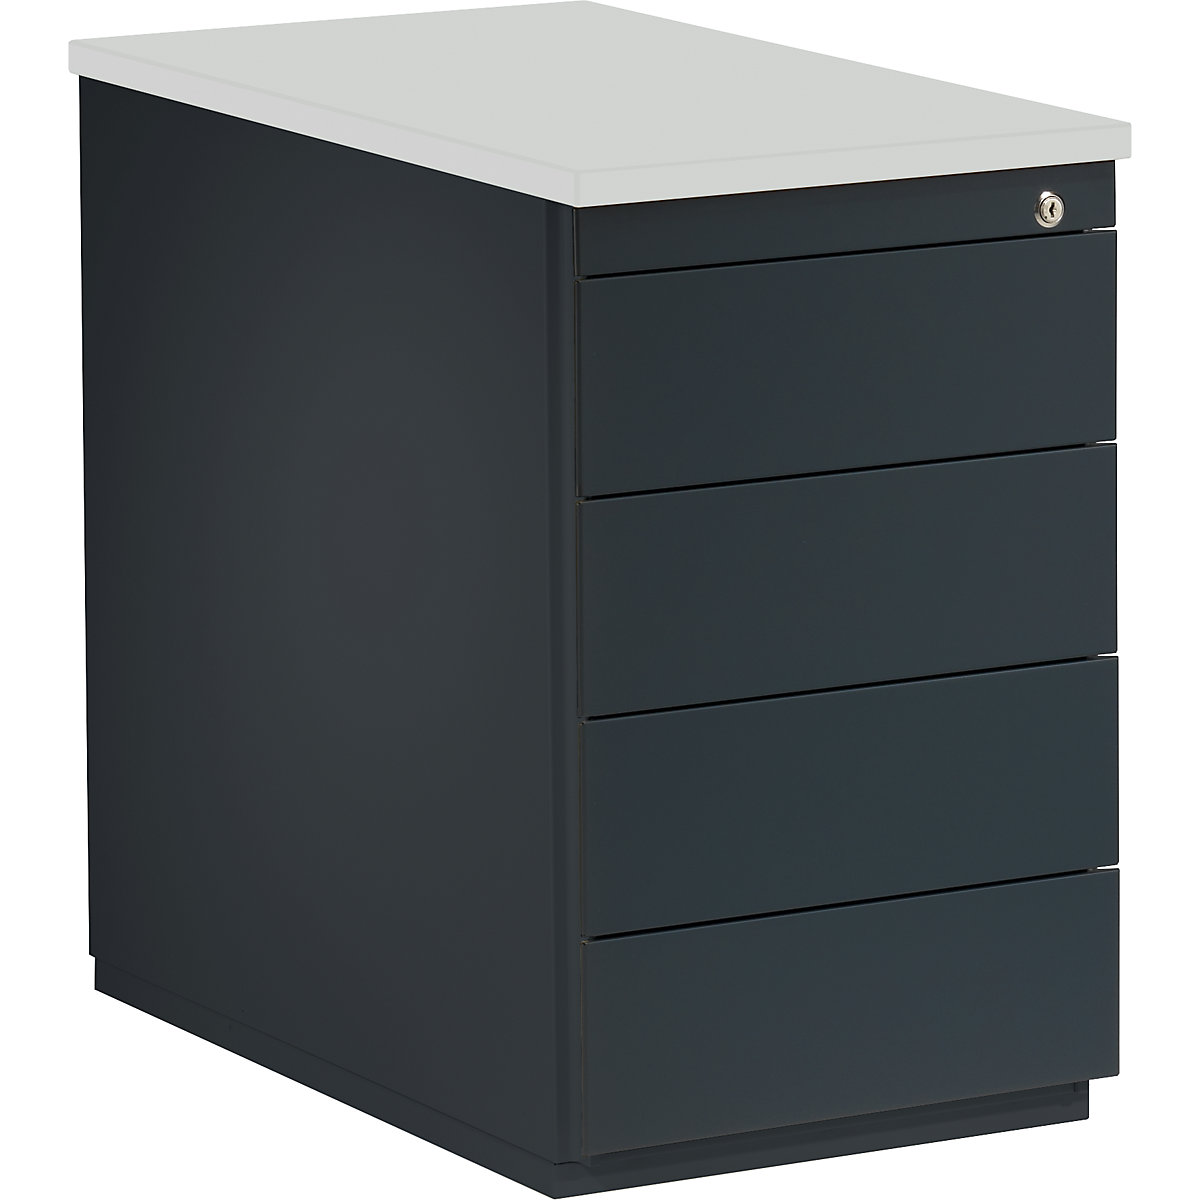 Drawer pedestal – mauser, HxD 720 x 800 mm, 4 drawers, charcoal / charcoal / light grey-8